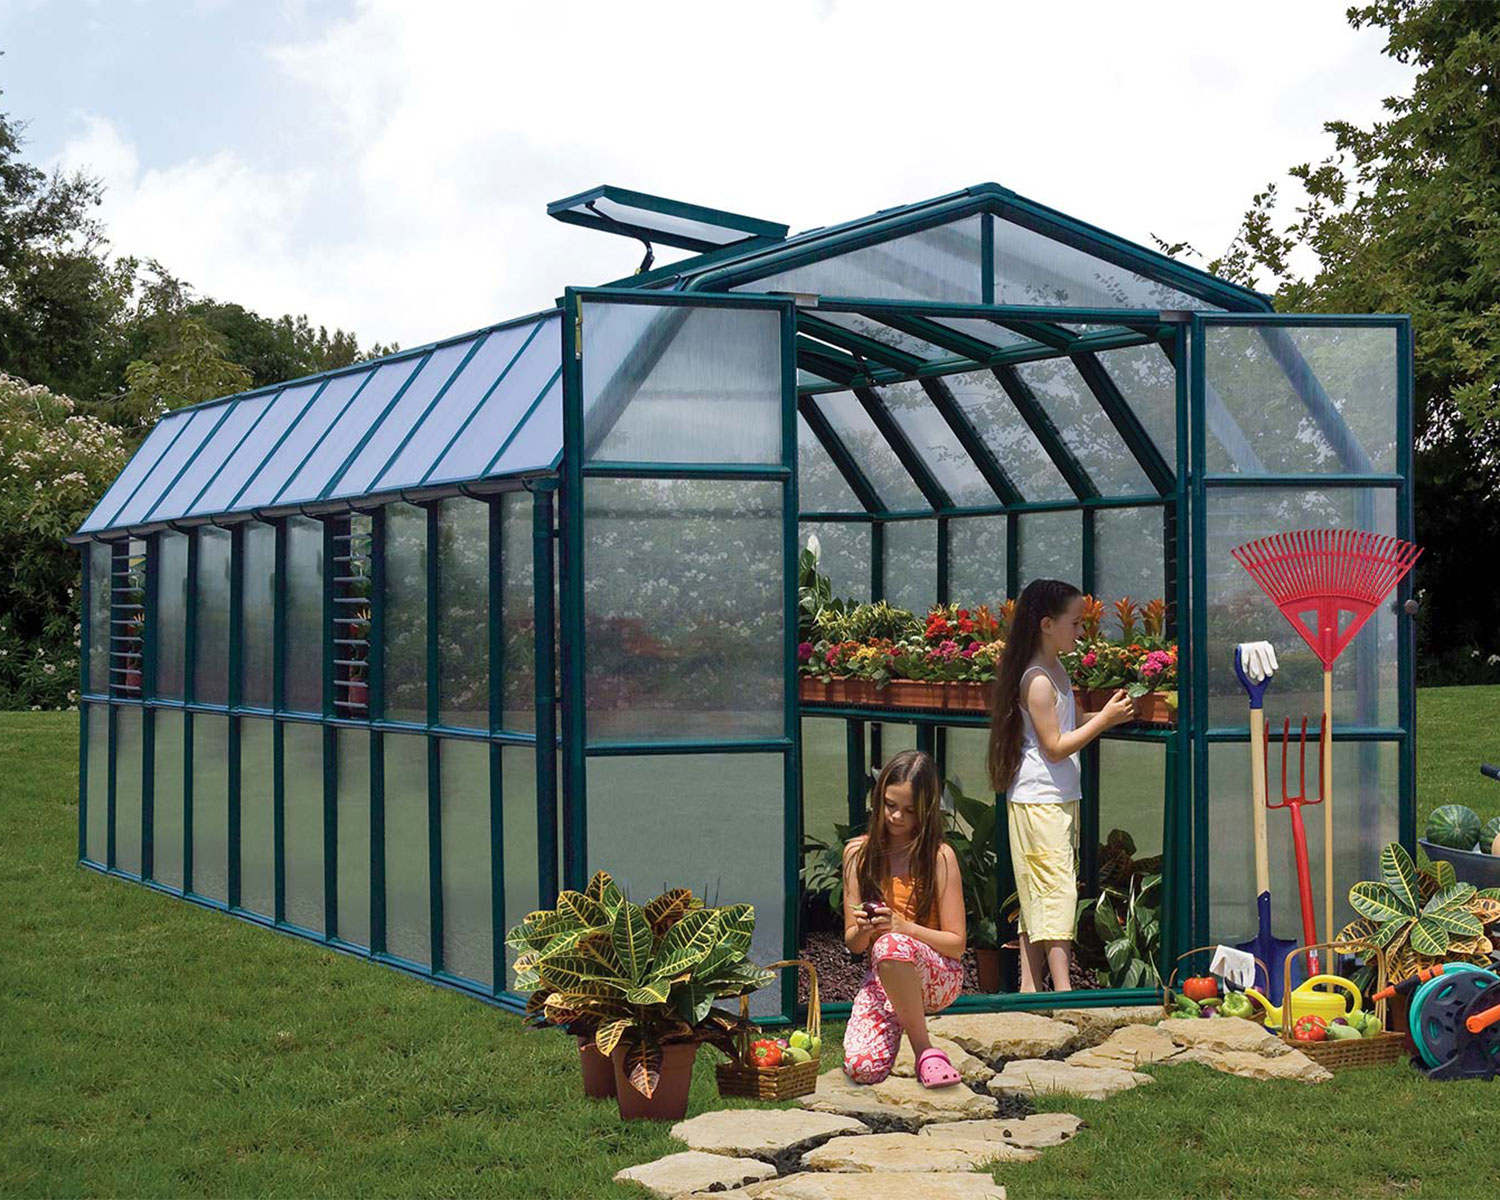 Greenhouse Prestige 8 ft. x 20 ft. Green Structure & Twin Wall Panels growing plants